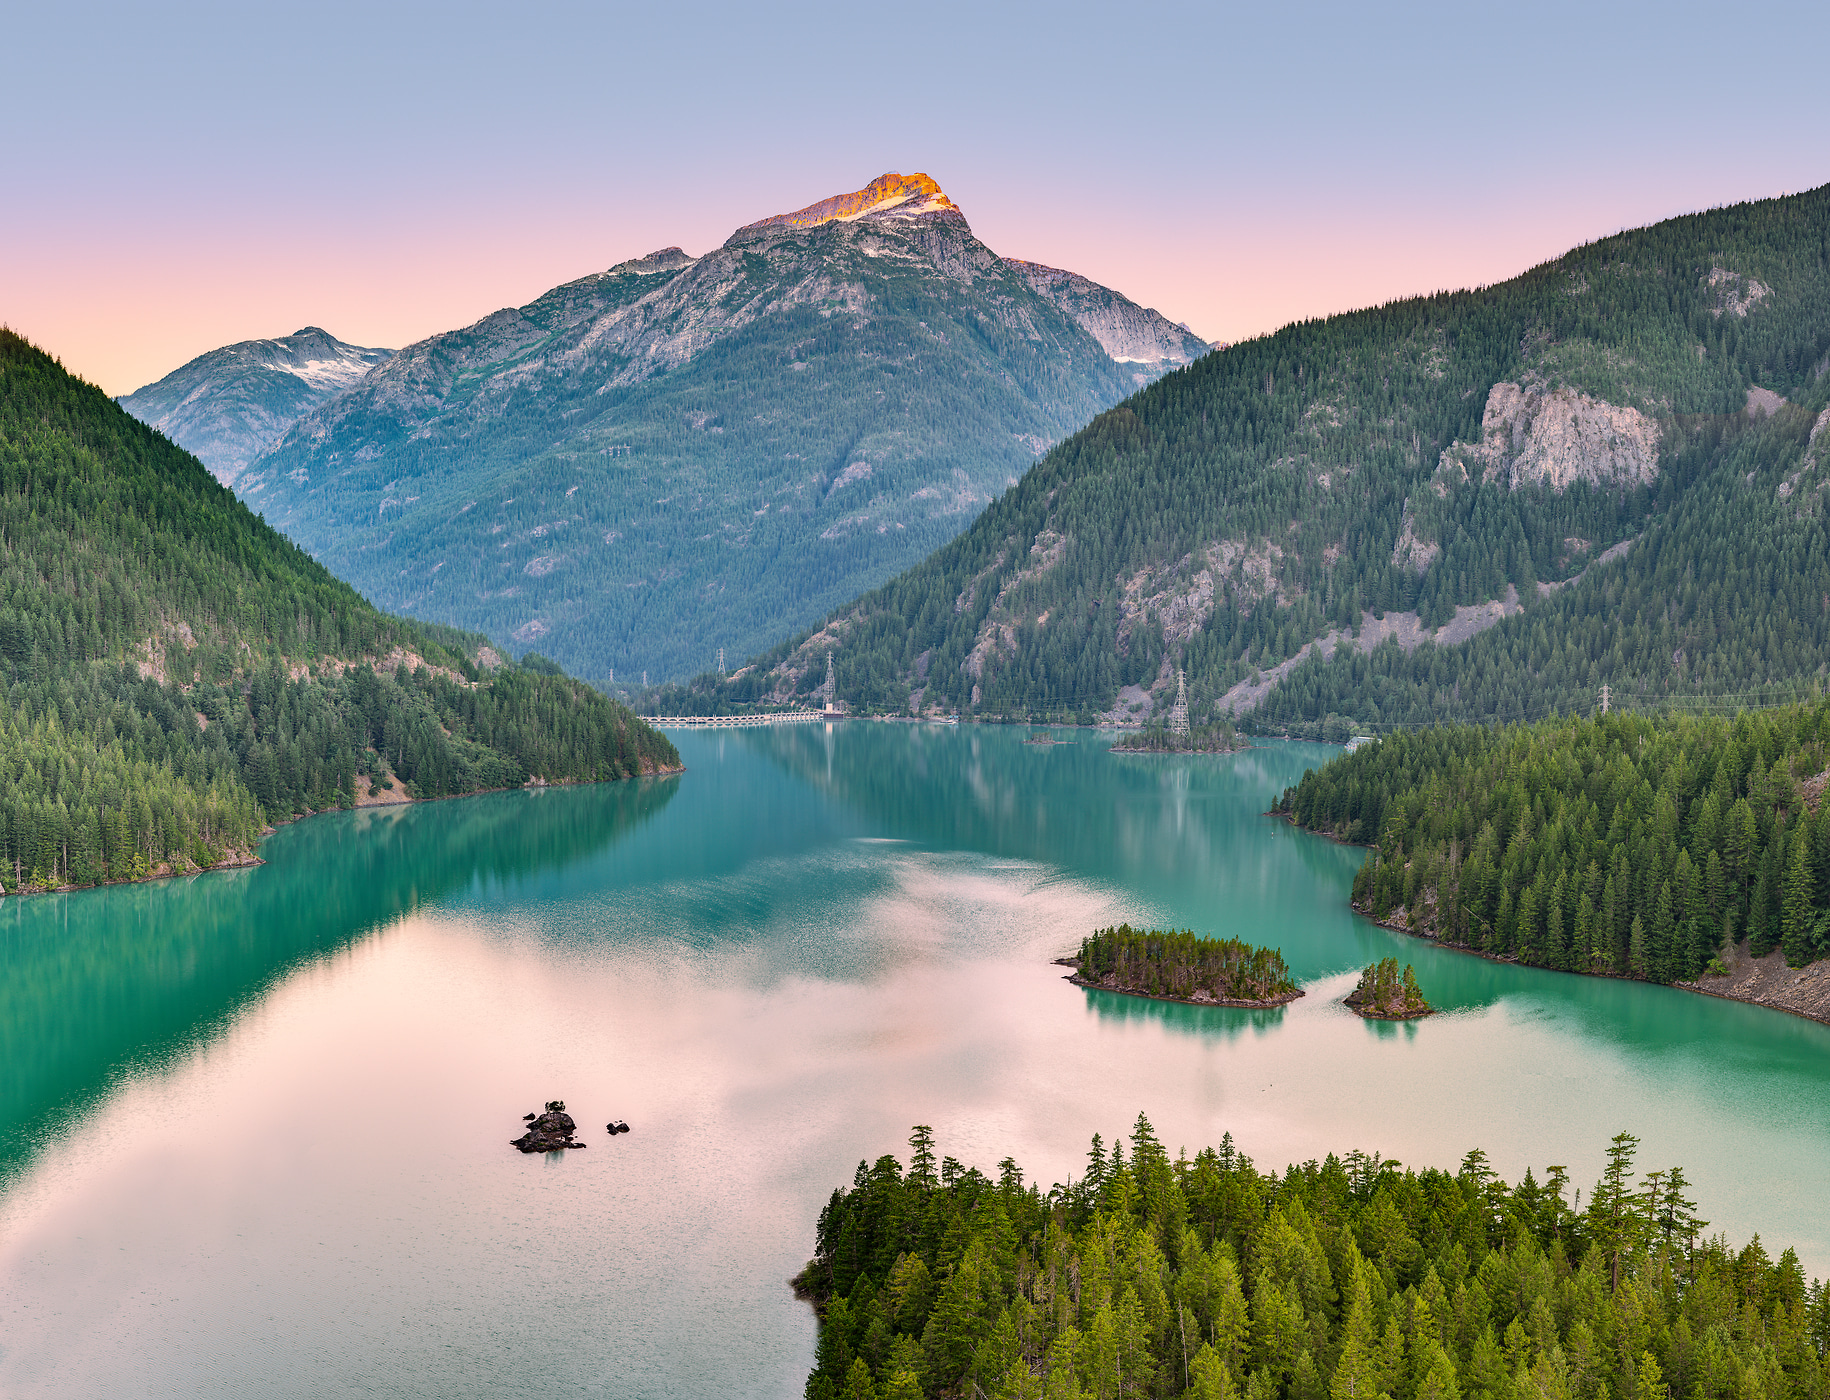 721 megapixels! A very high resolution, large-format VAST photo print of a lake and mountains; landscape photograph created by Chris Blake in Diablo Lake, North Cascades National Park.